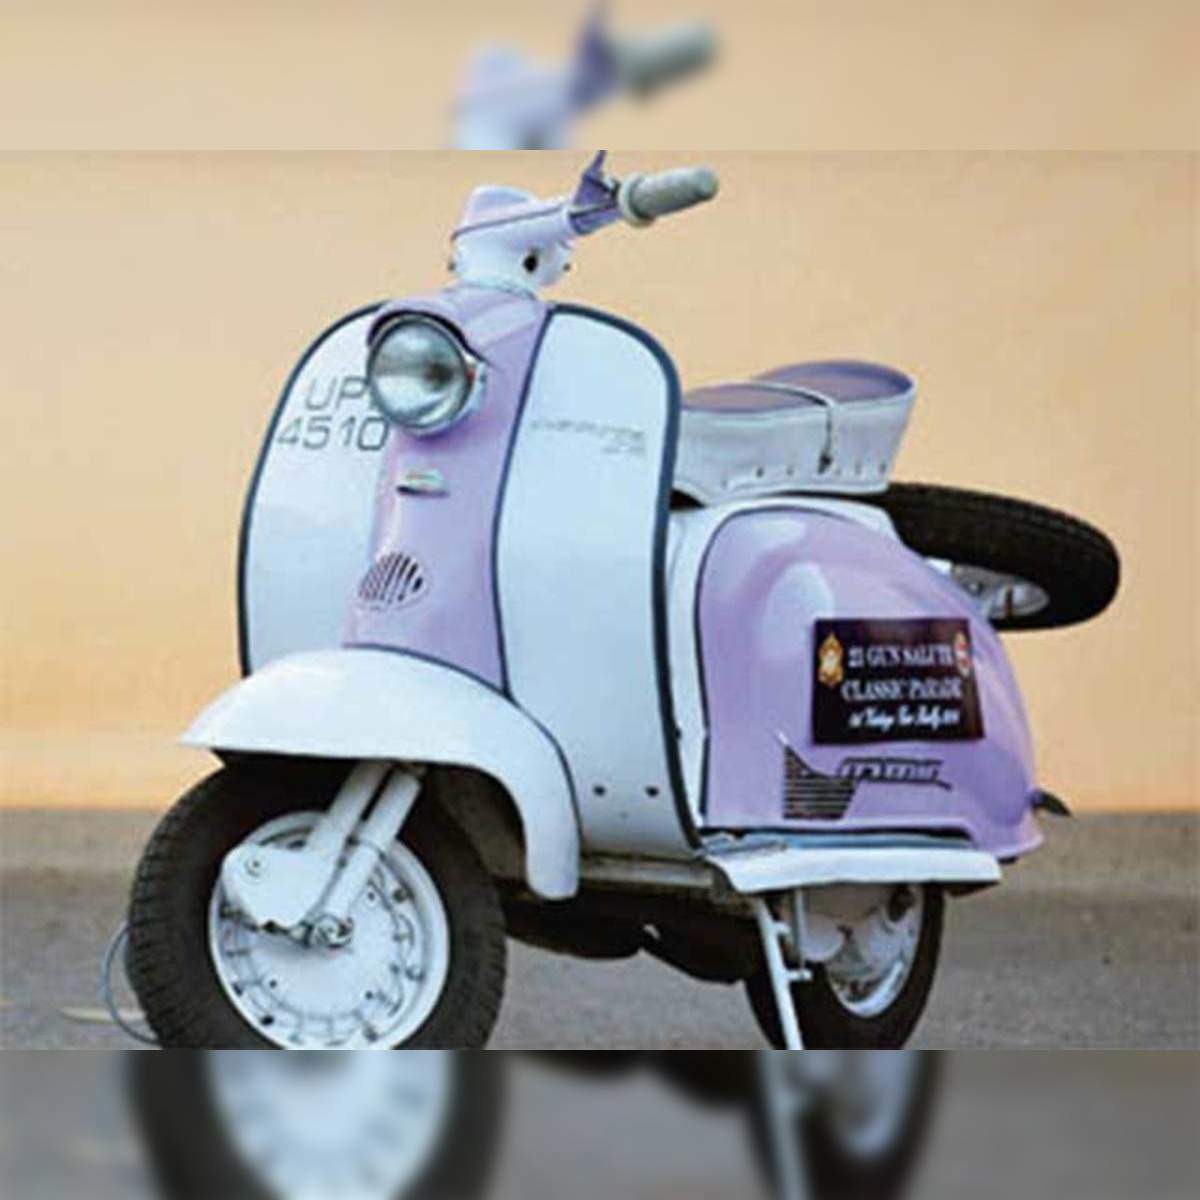 Government may seek help to keep Lambretta brand - The Economic Times